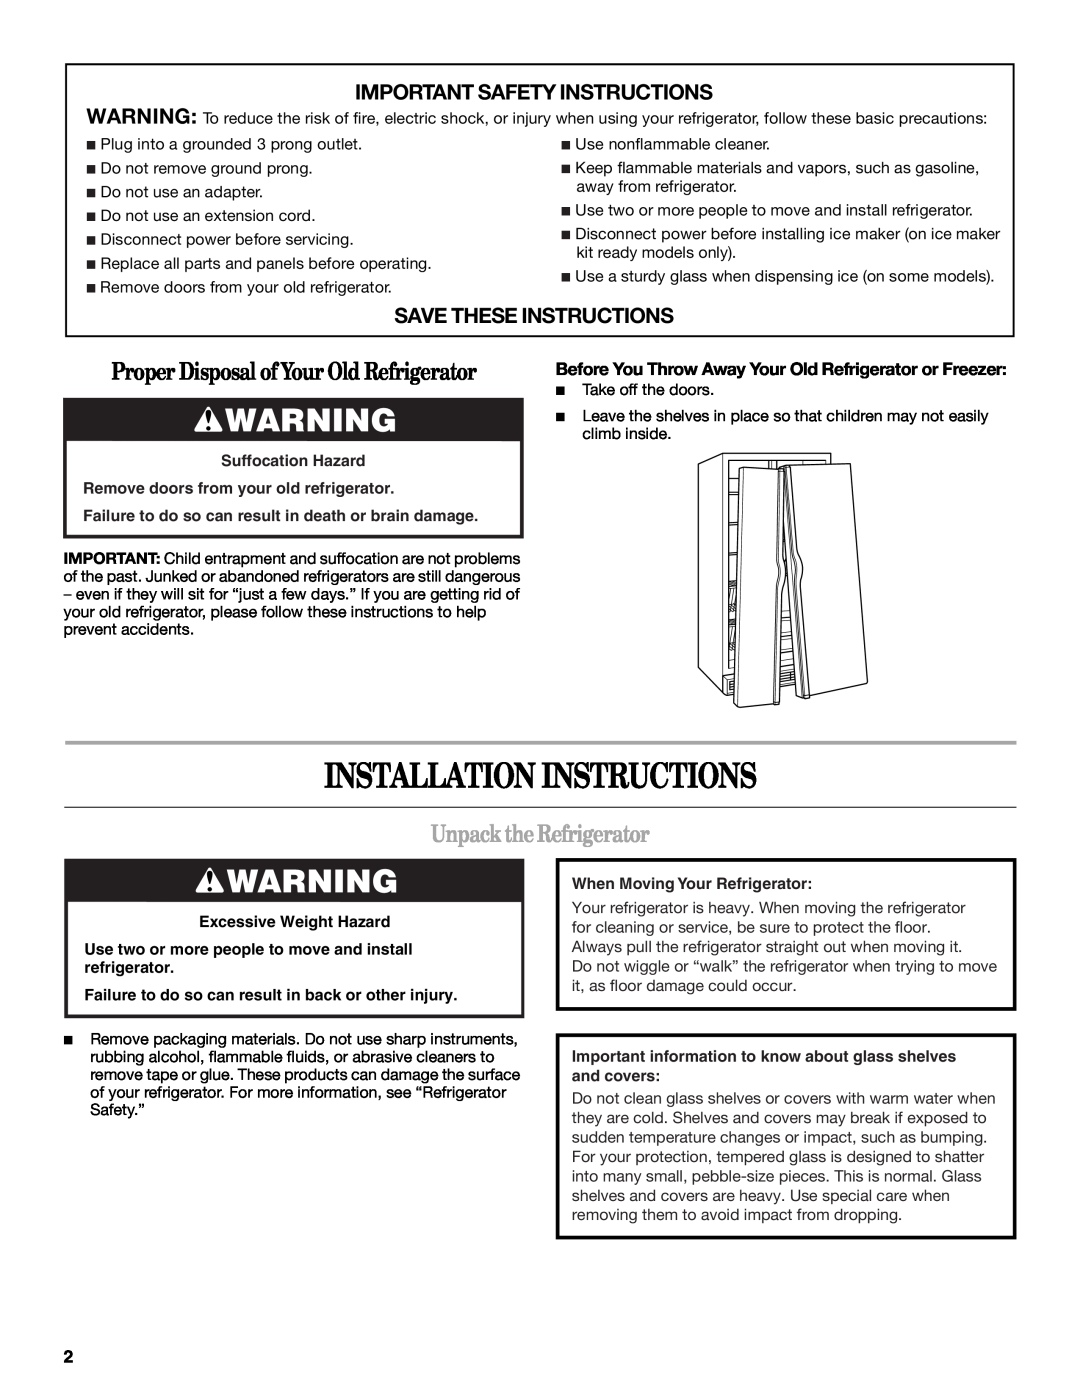 Amana T1WG2L Installation Instructions, Unpack the Refrigerator, Important Safety Instructions, Save These Instructions 